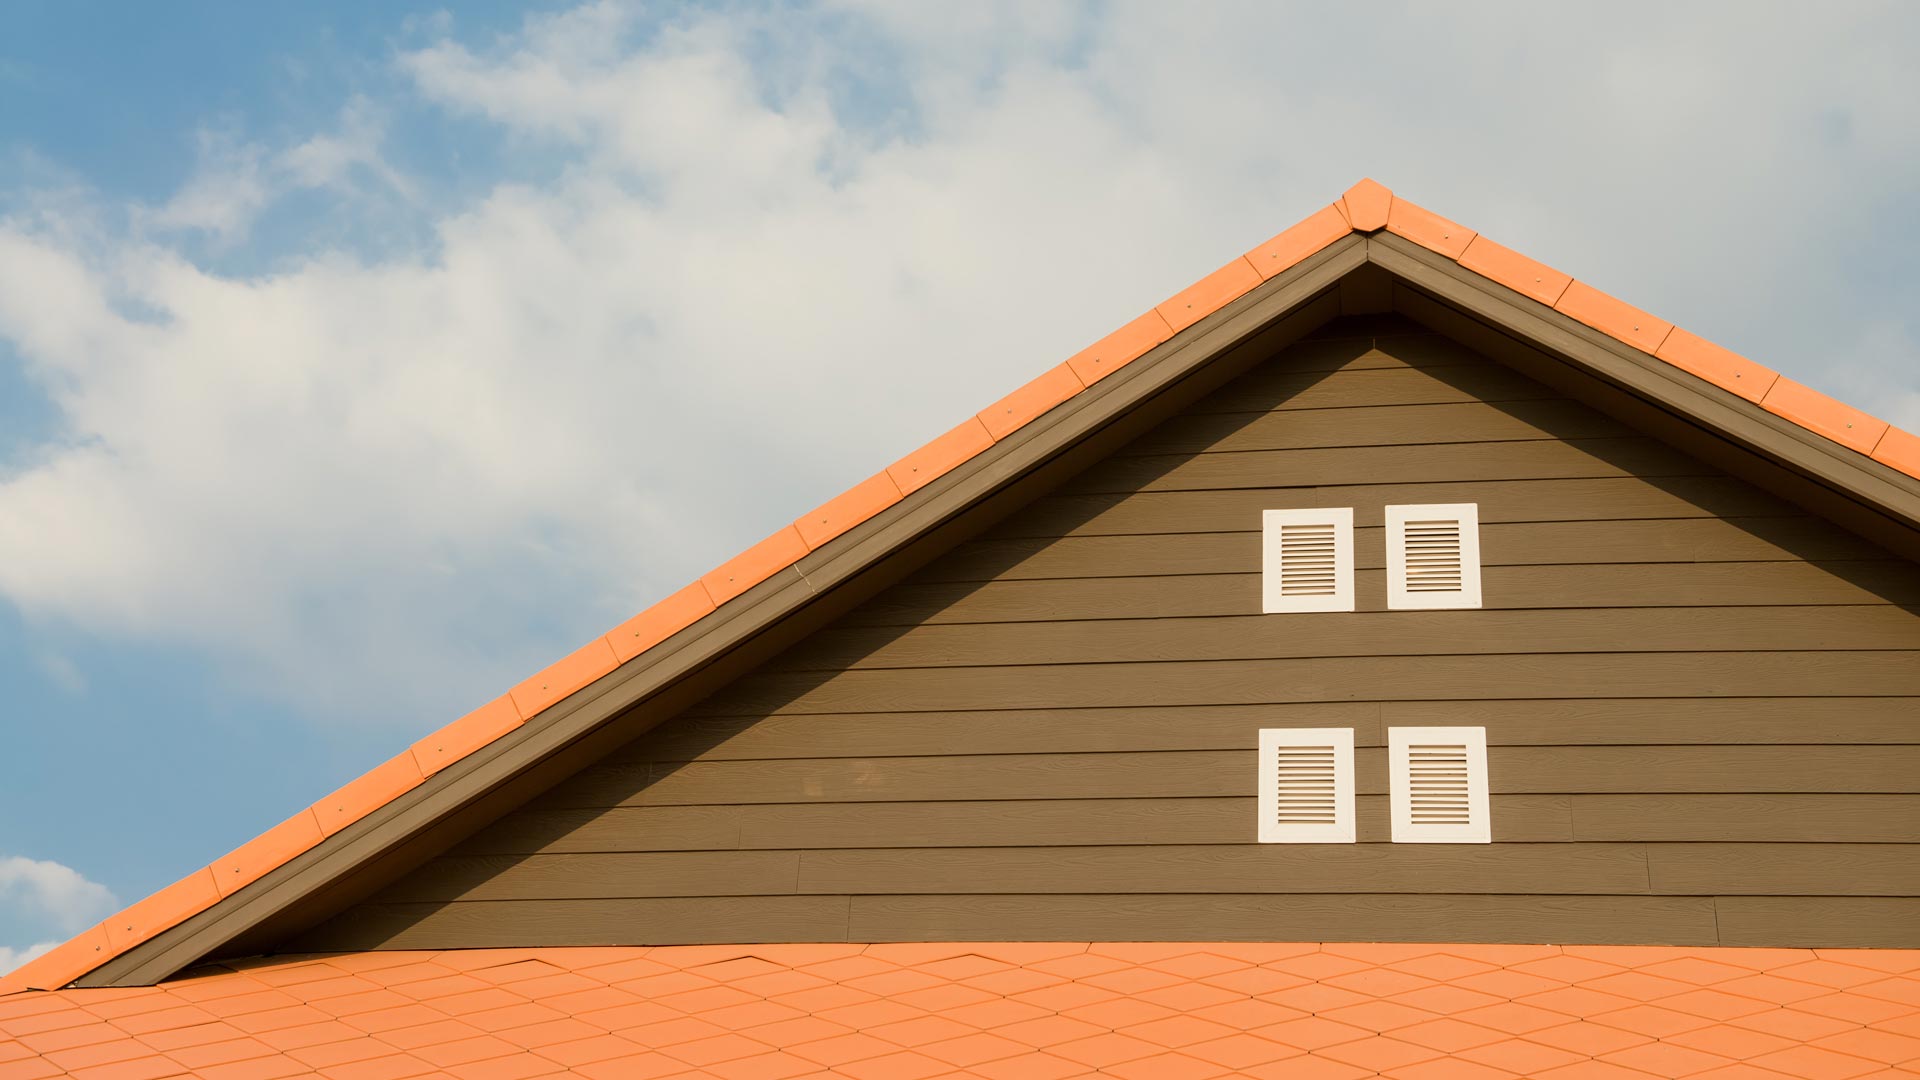 Find a Roofing Installer Who Will Expertly Serve Your Needs